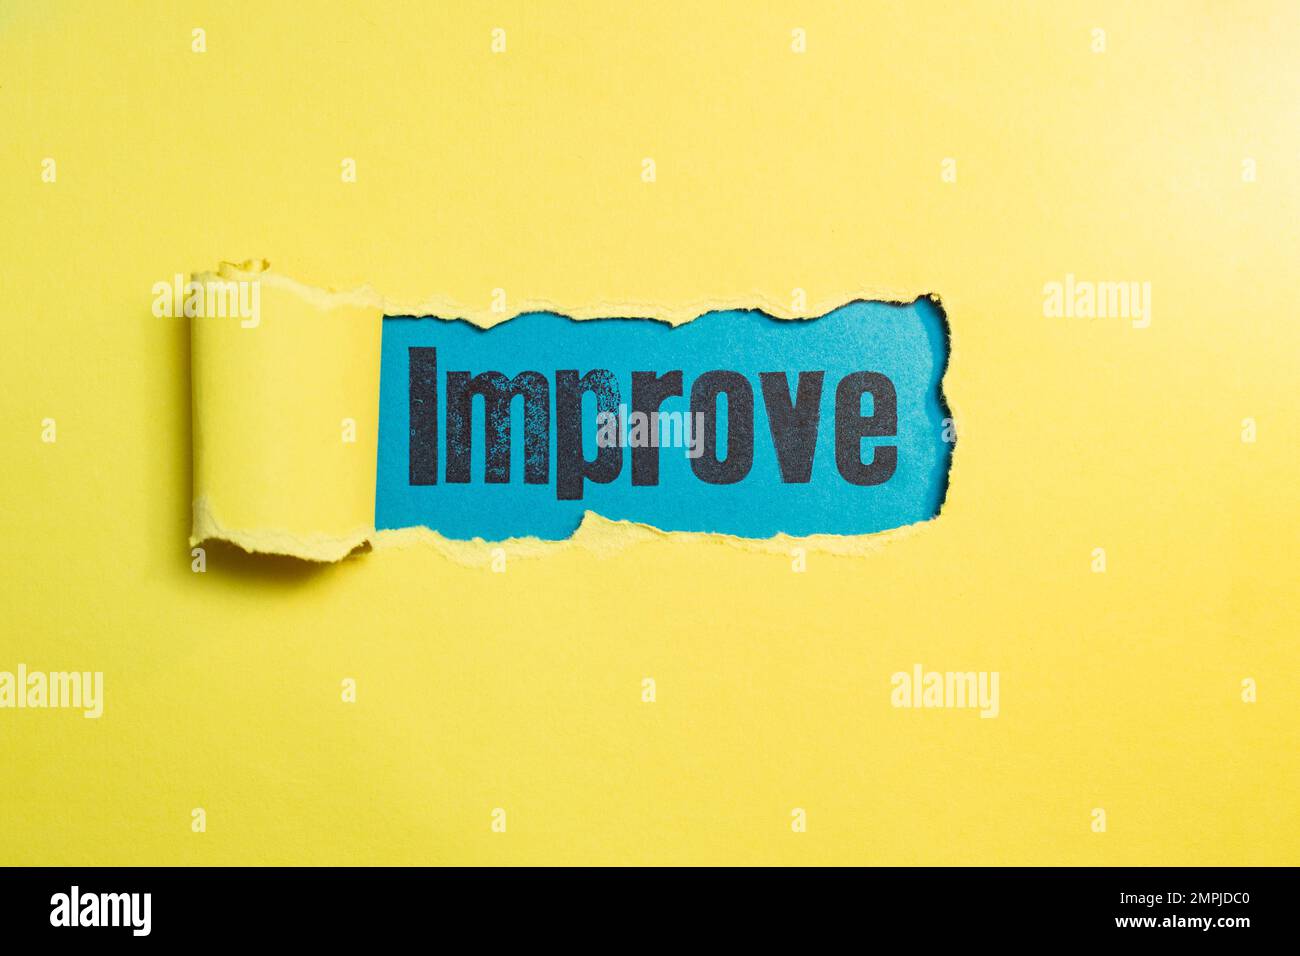 Improve written with stamp letters on blue paper texture thru a ripped strip on yellow paper. Stock Photo